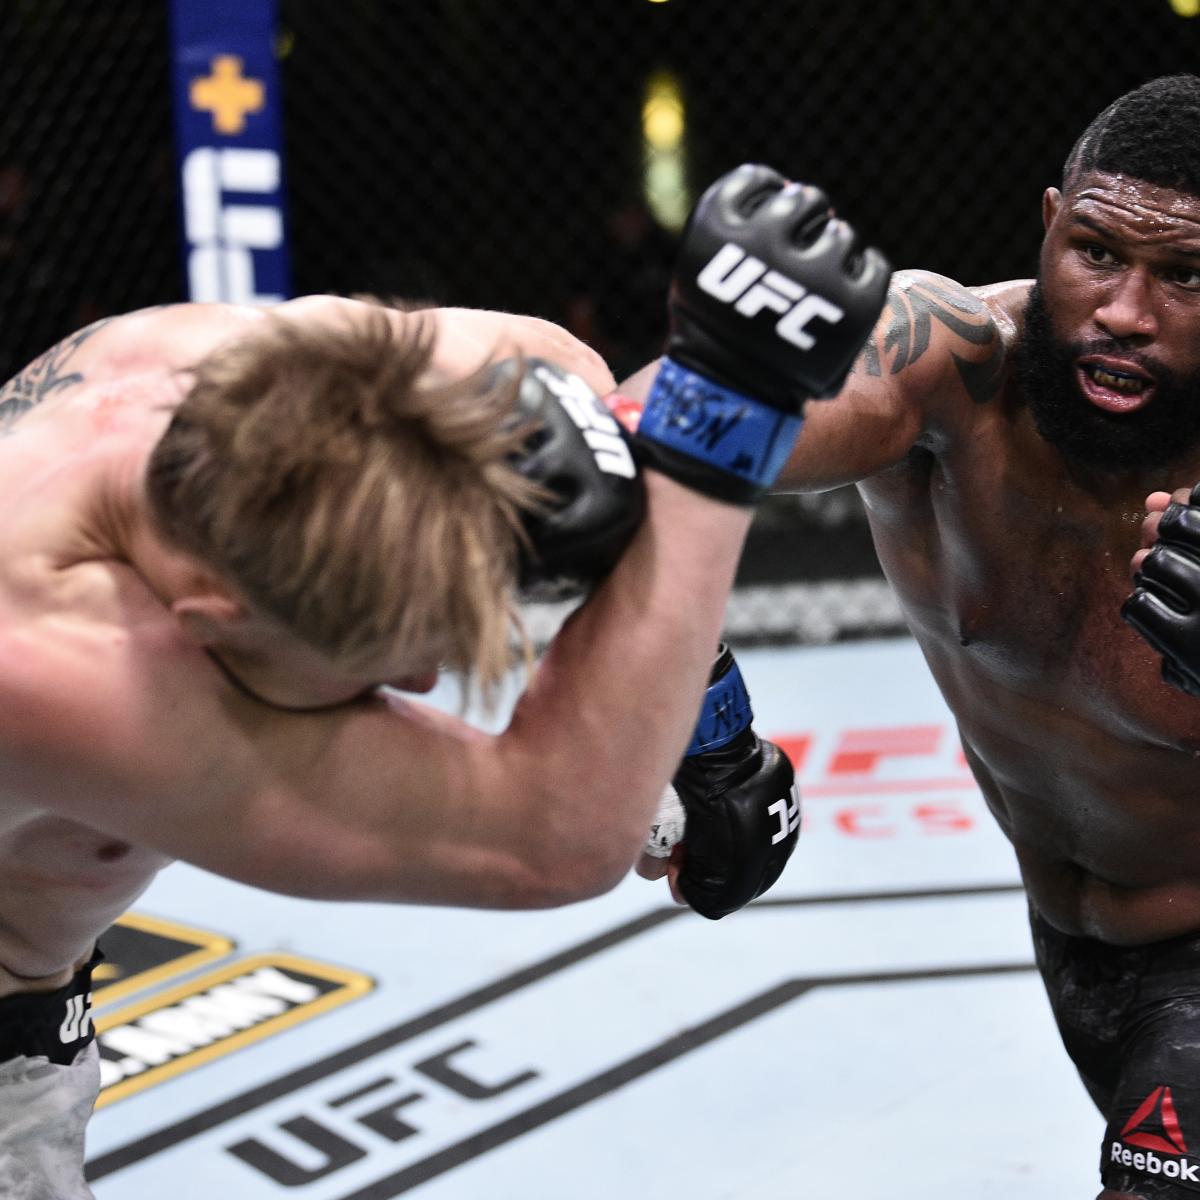 Curtis Blaydes, Josh Emmett and All Fighter Payouts from UFC on ESPN 11 Card